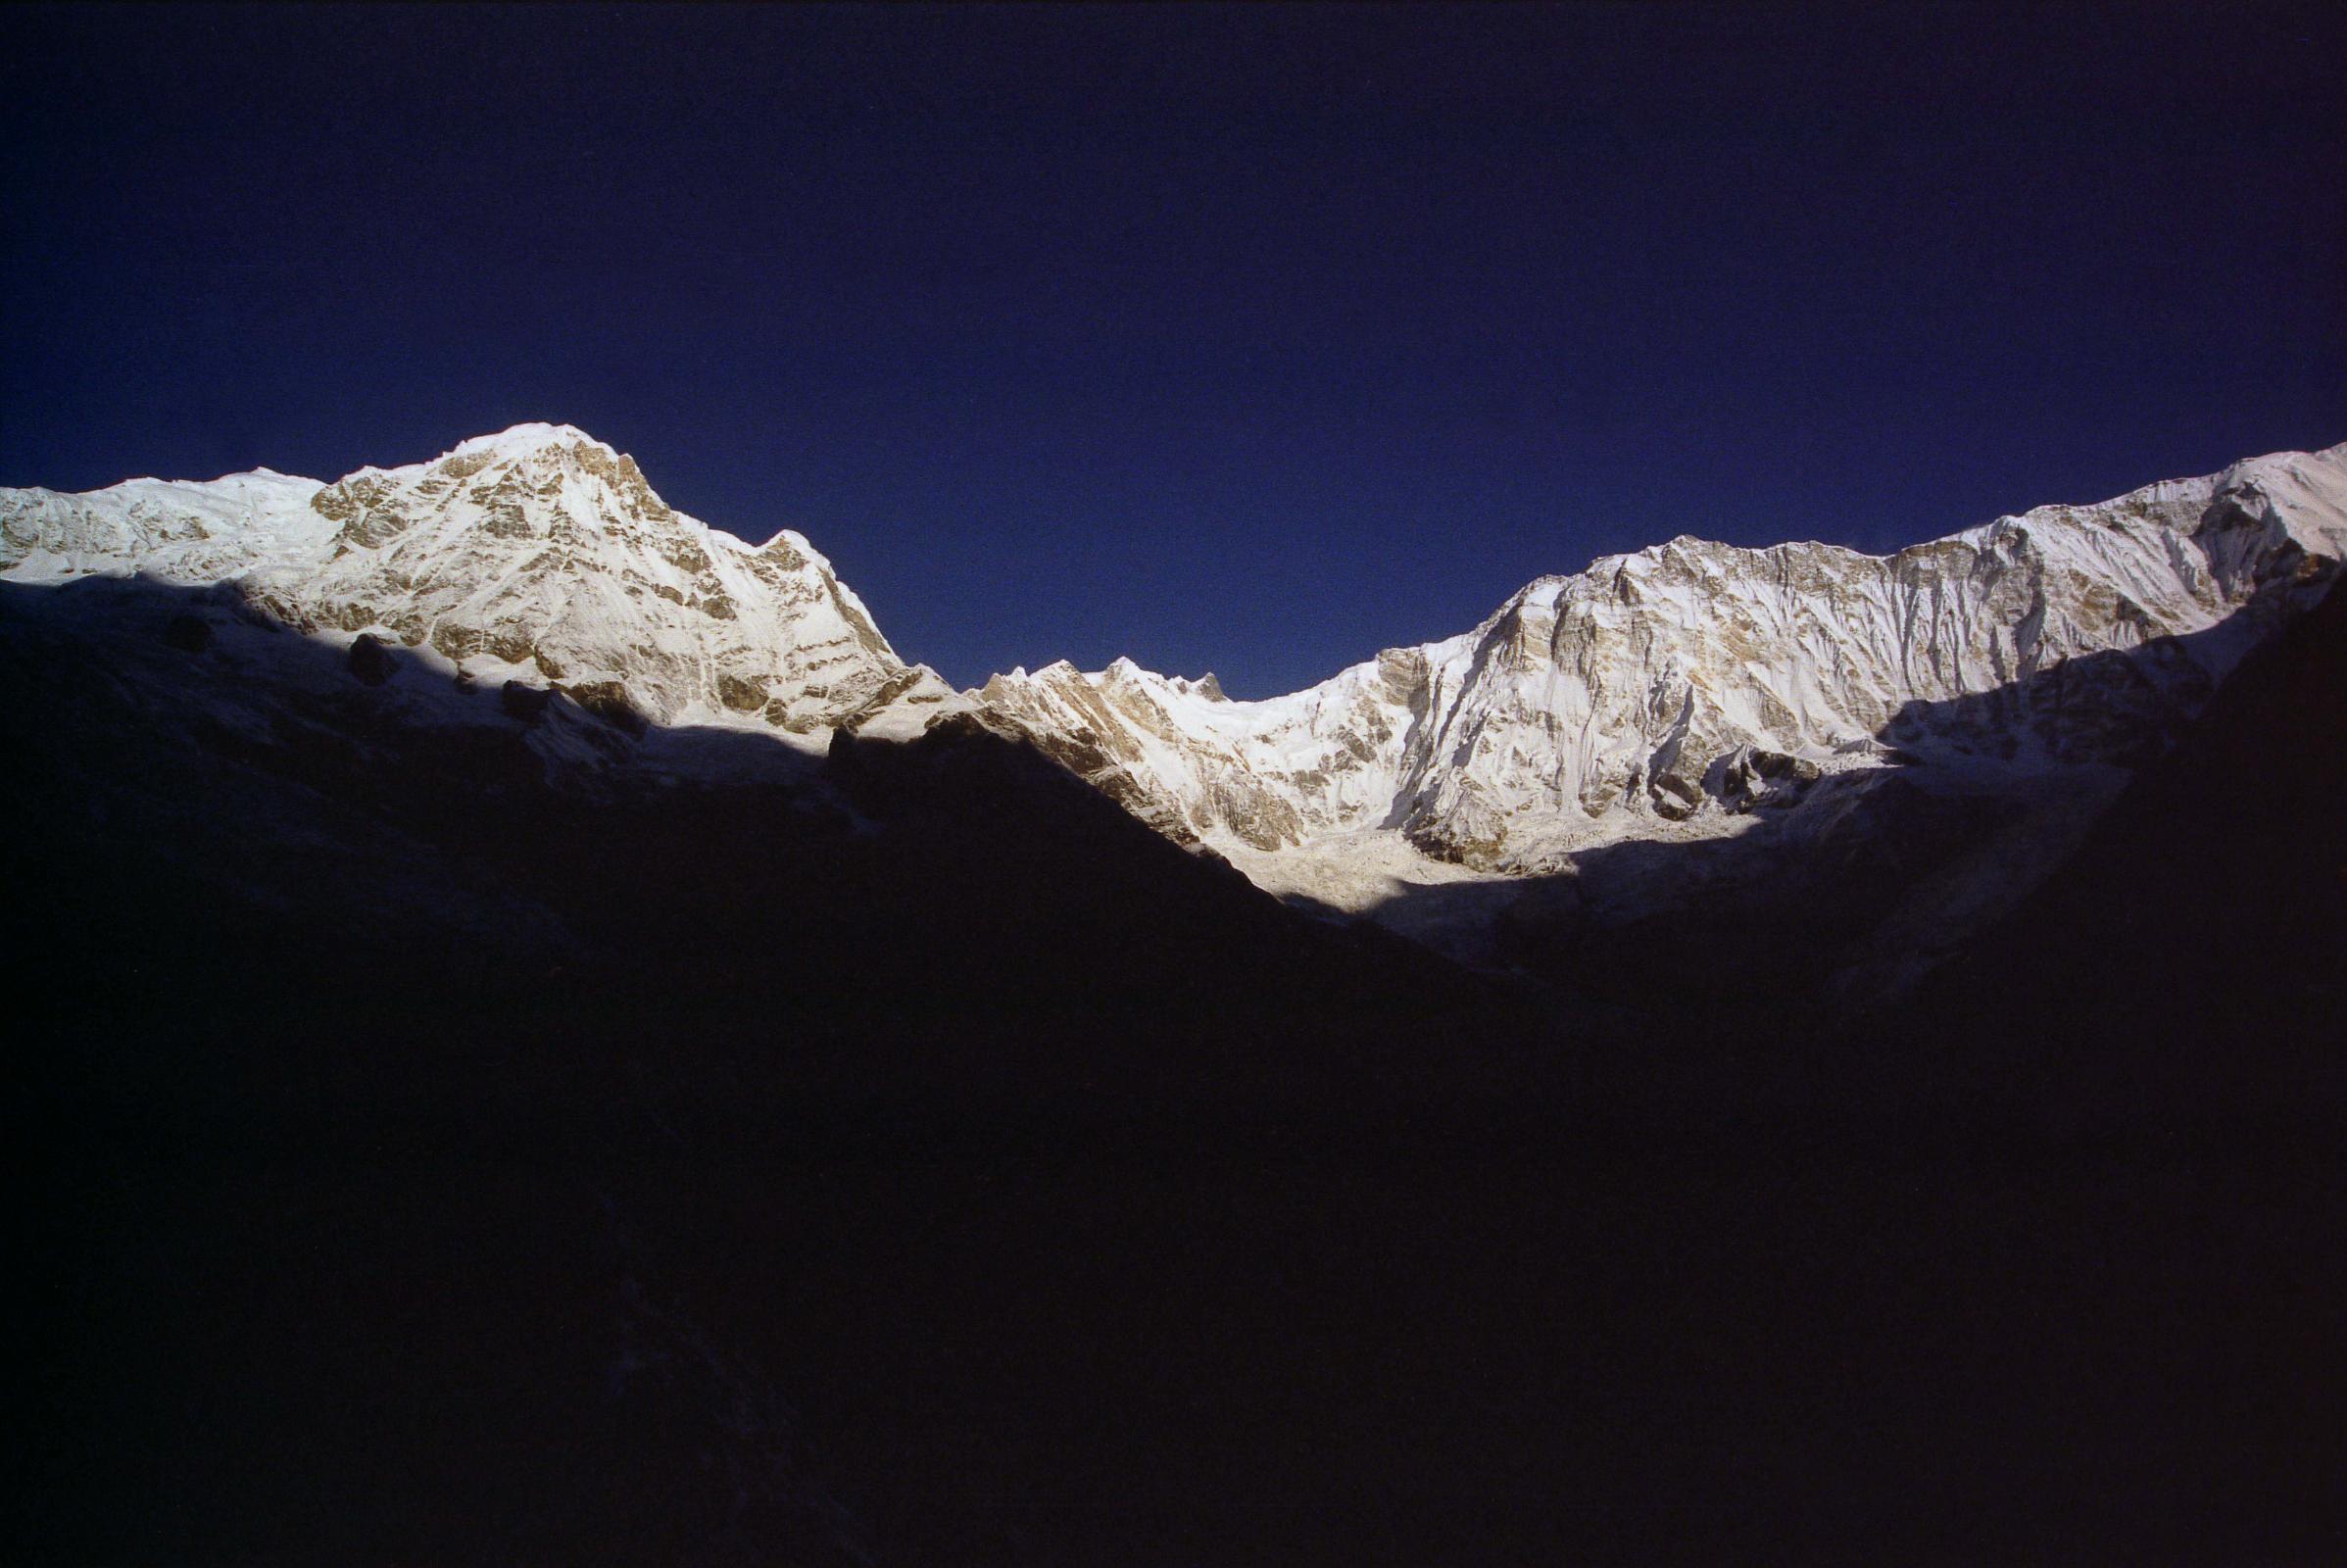 307 Annapurna South, Fang, Annapurna Main, Central, East Summits After Sunrise From Annapurna Sanctuary Base Camp I watched the rising sun illuminate more and more of the mountains for over an hour from Annapurna Sanctuary Base Camp. Here is a view from Annapurna South to Fang to Annapurna Main (8091m), Central (8051m), and East (8026m) summits and the 7.5km long ridge to Roc Noir (7485m).